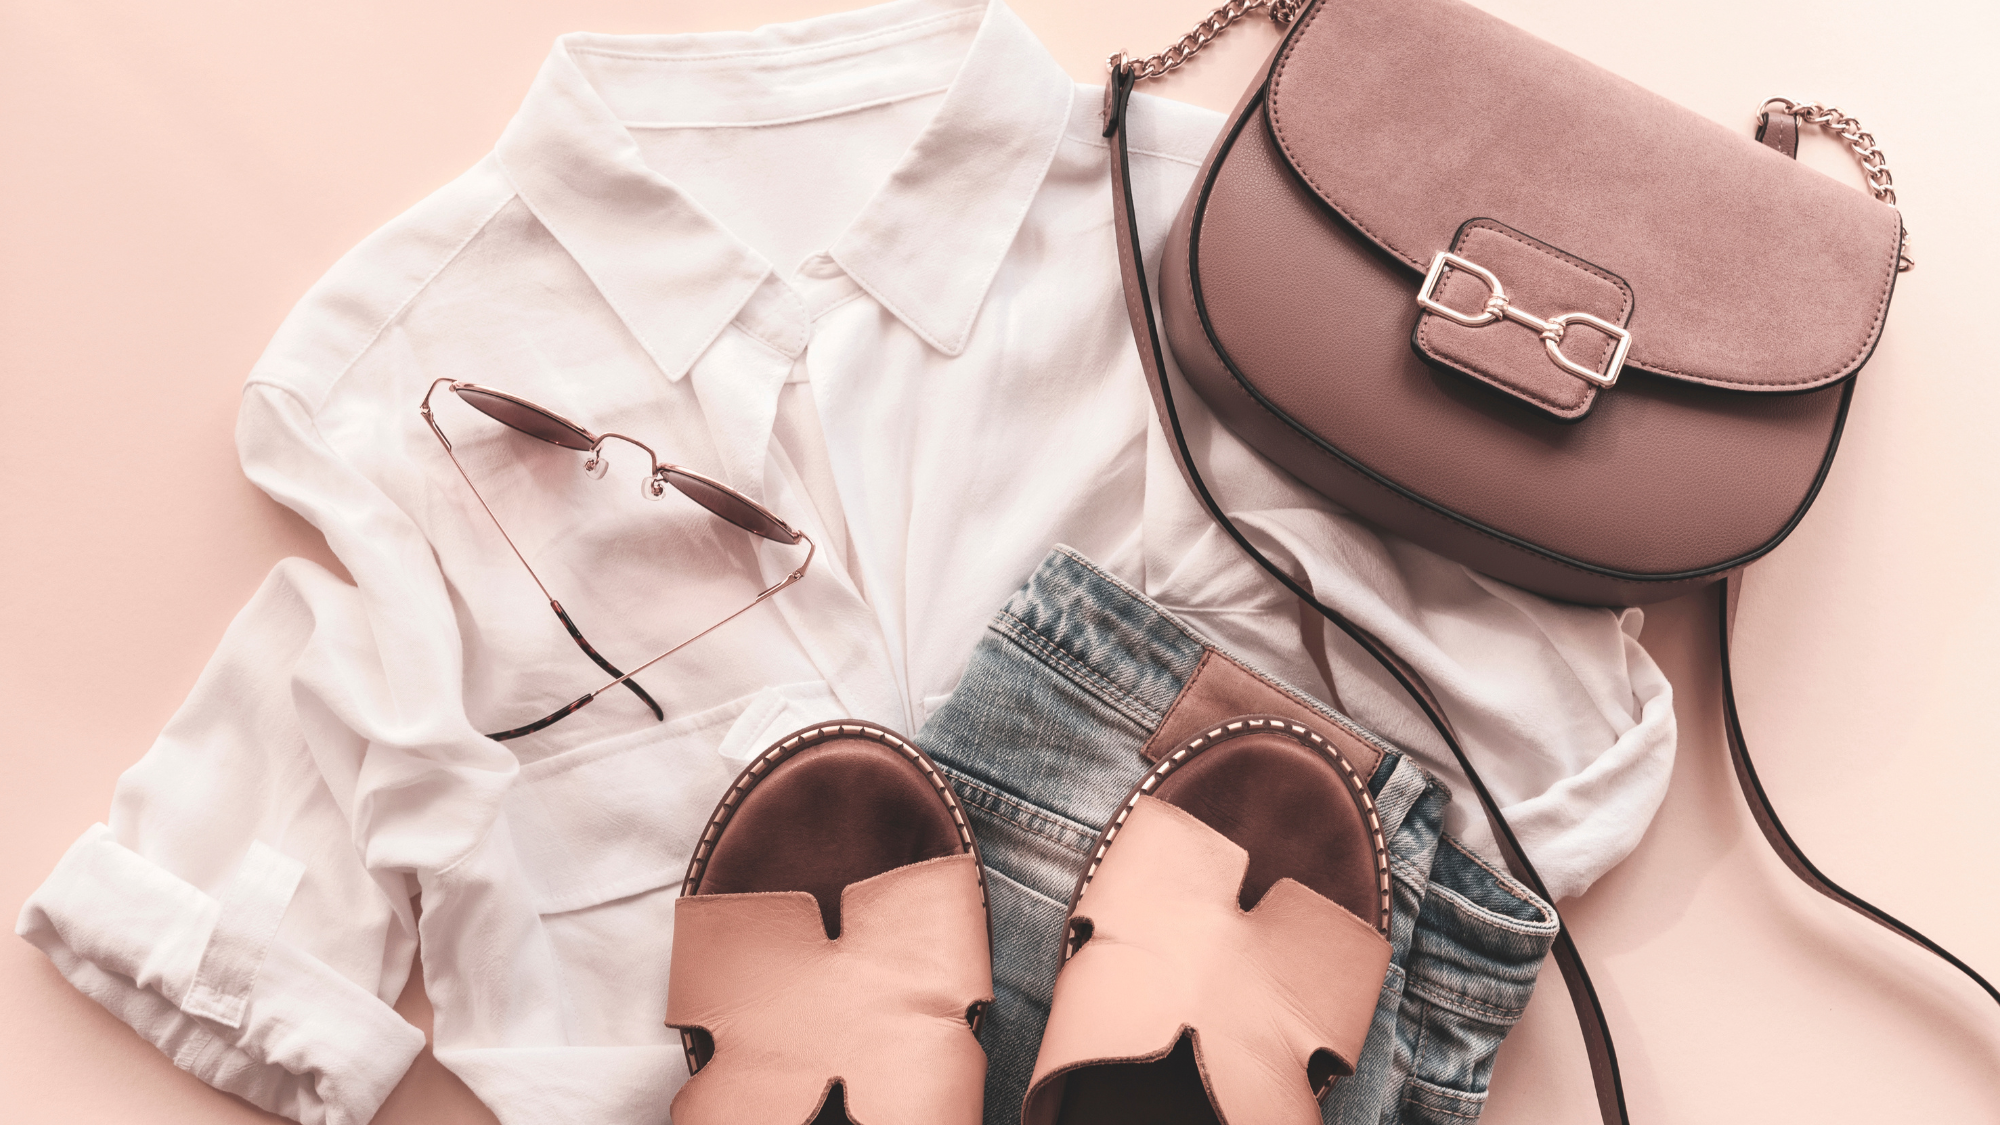 Women's button down shirt, jeans, sandals, handbag, and glasses arranged on the floor.